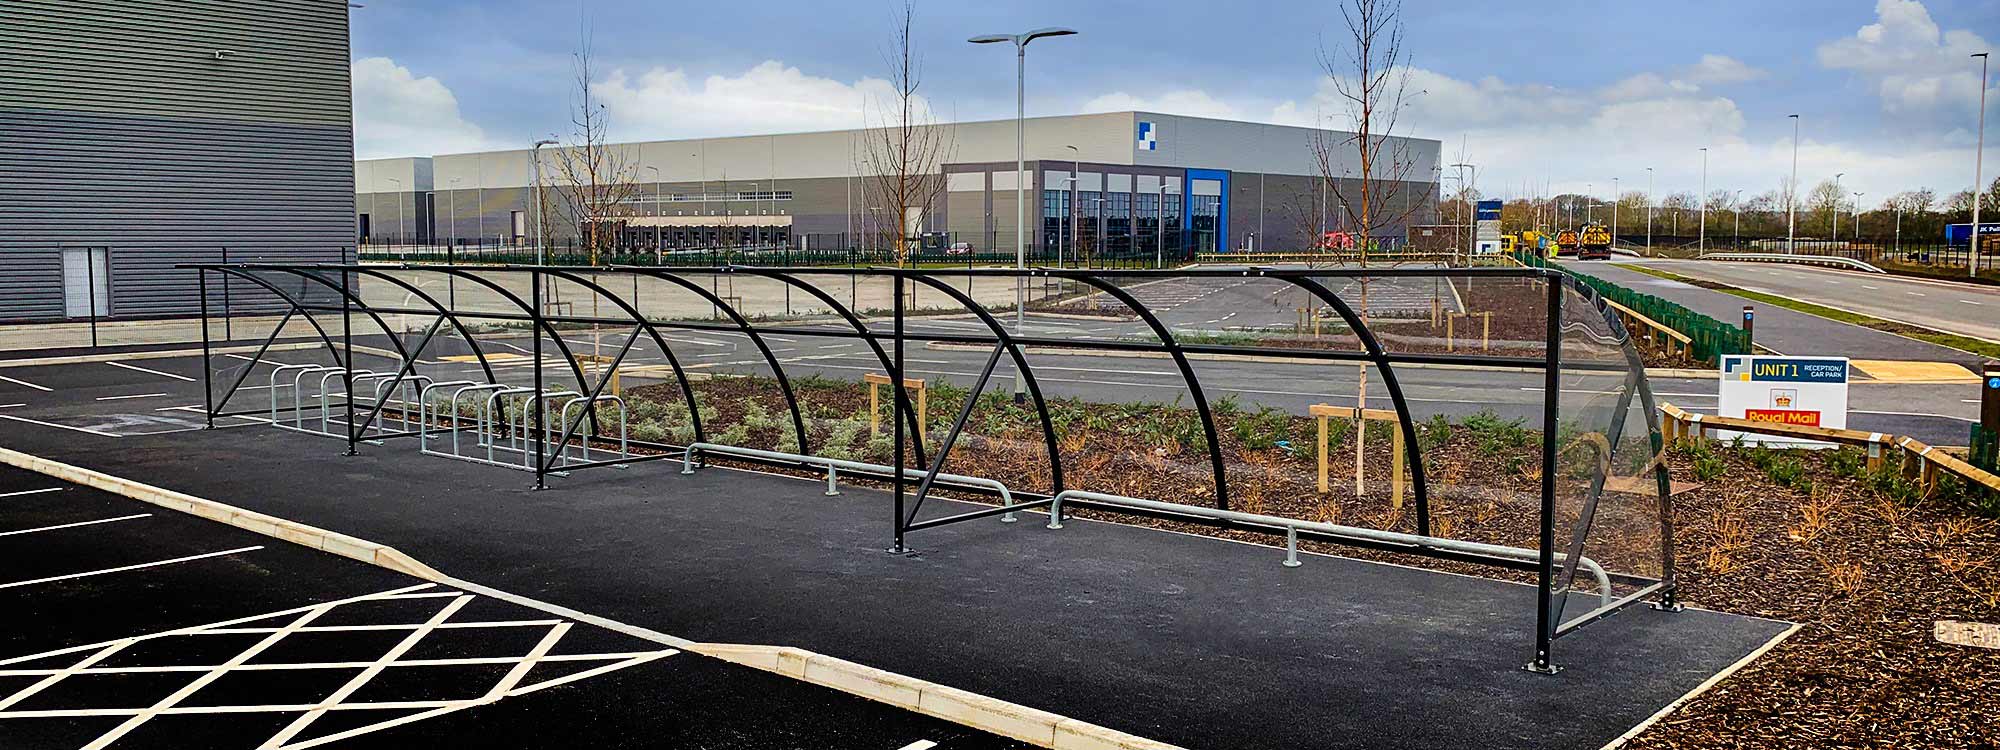 CYCLE SHELTERS